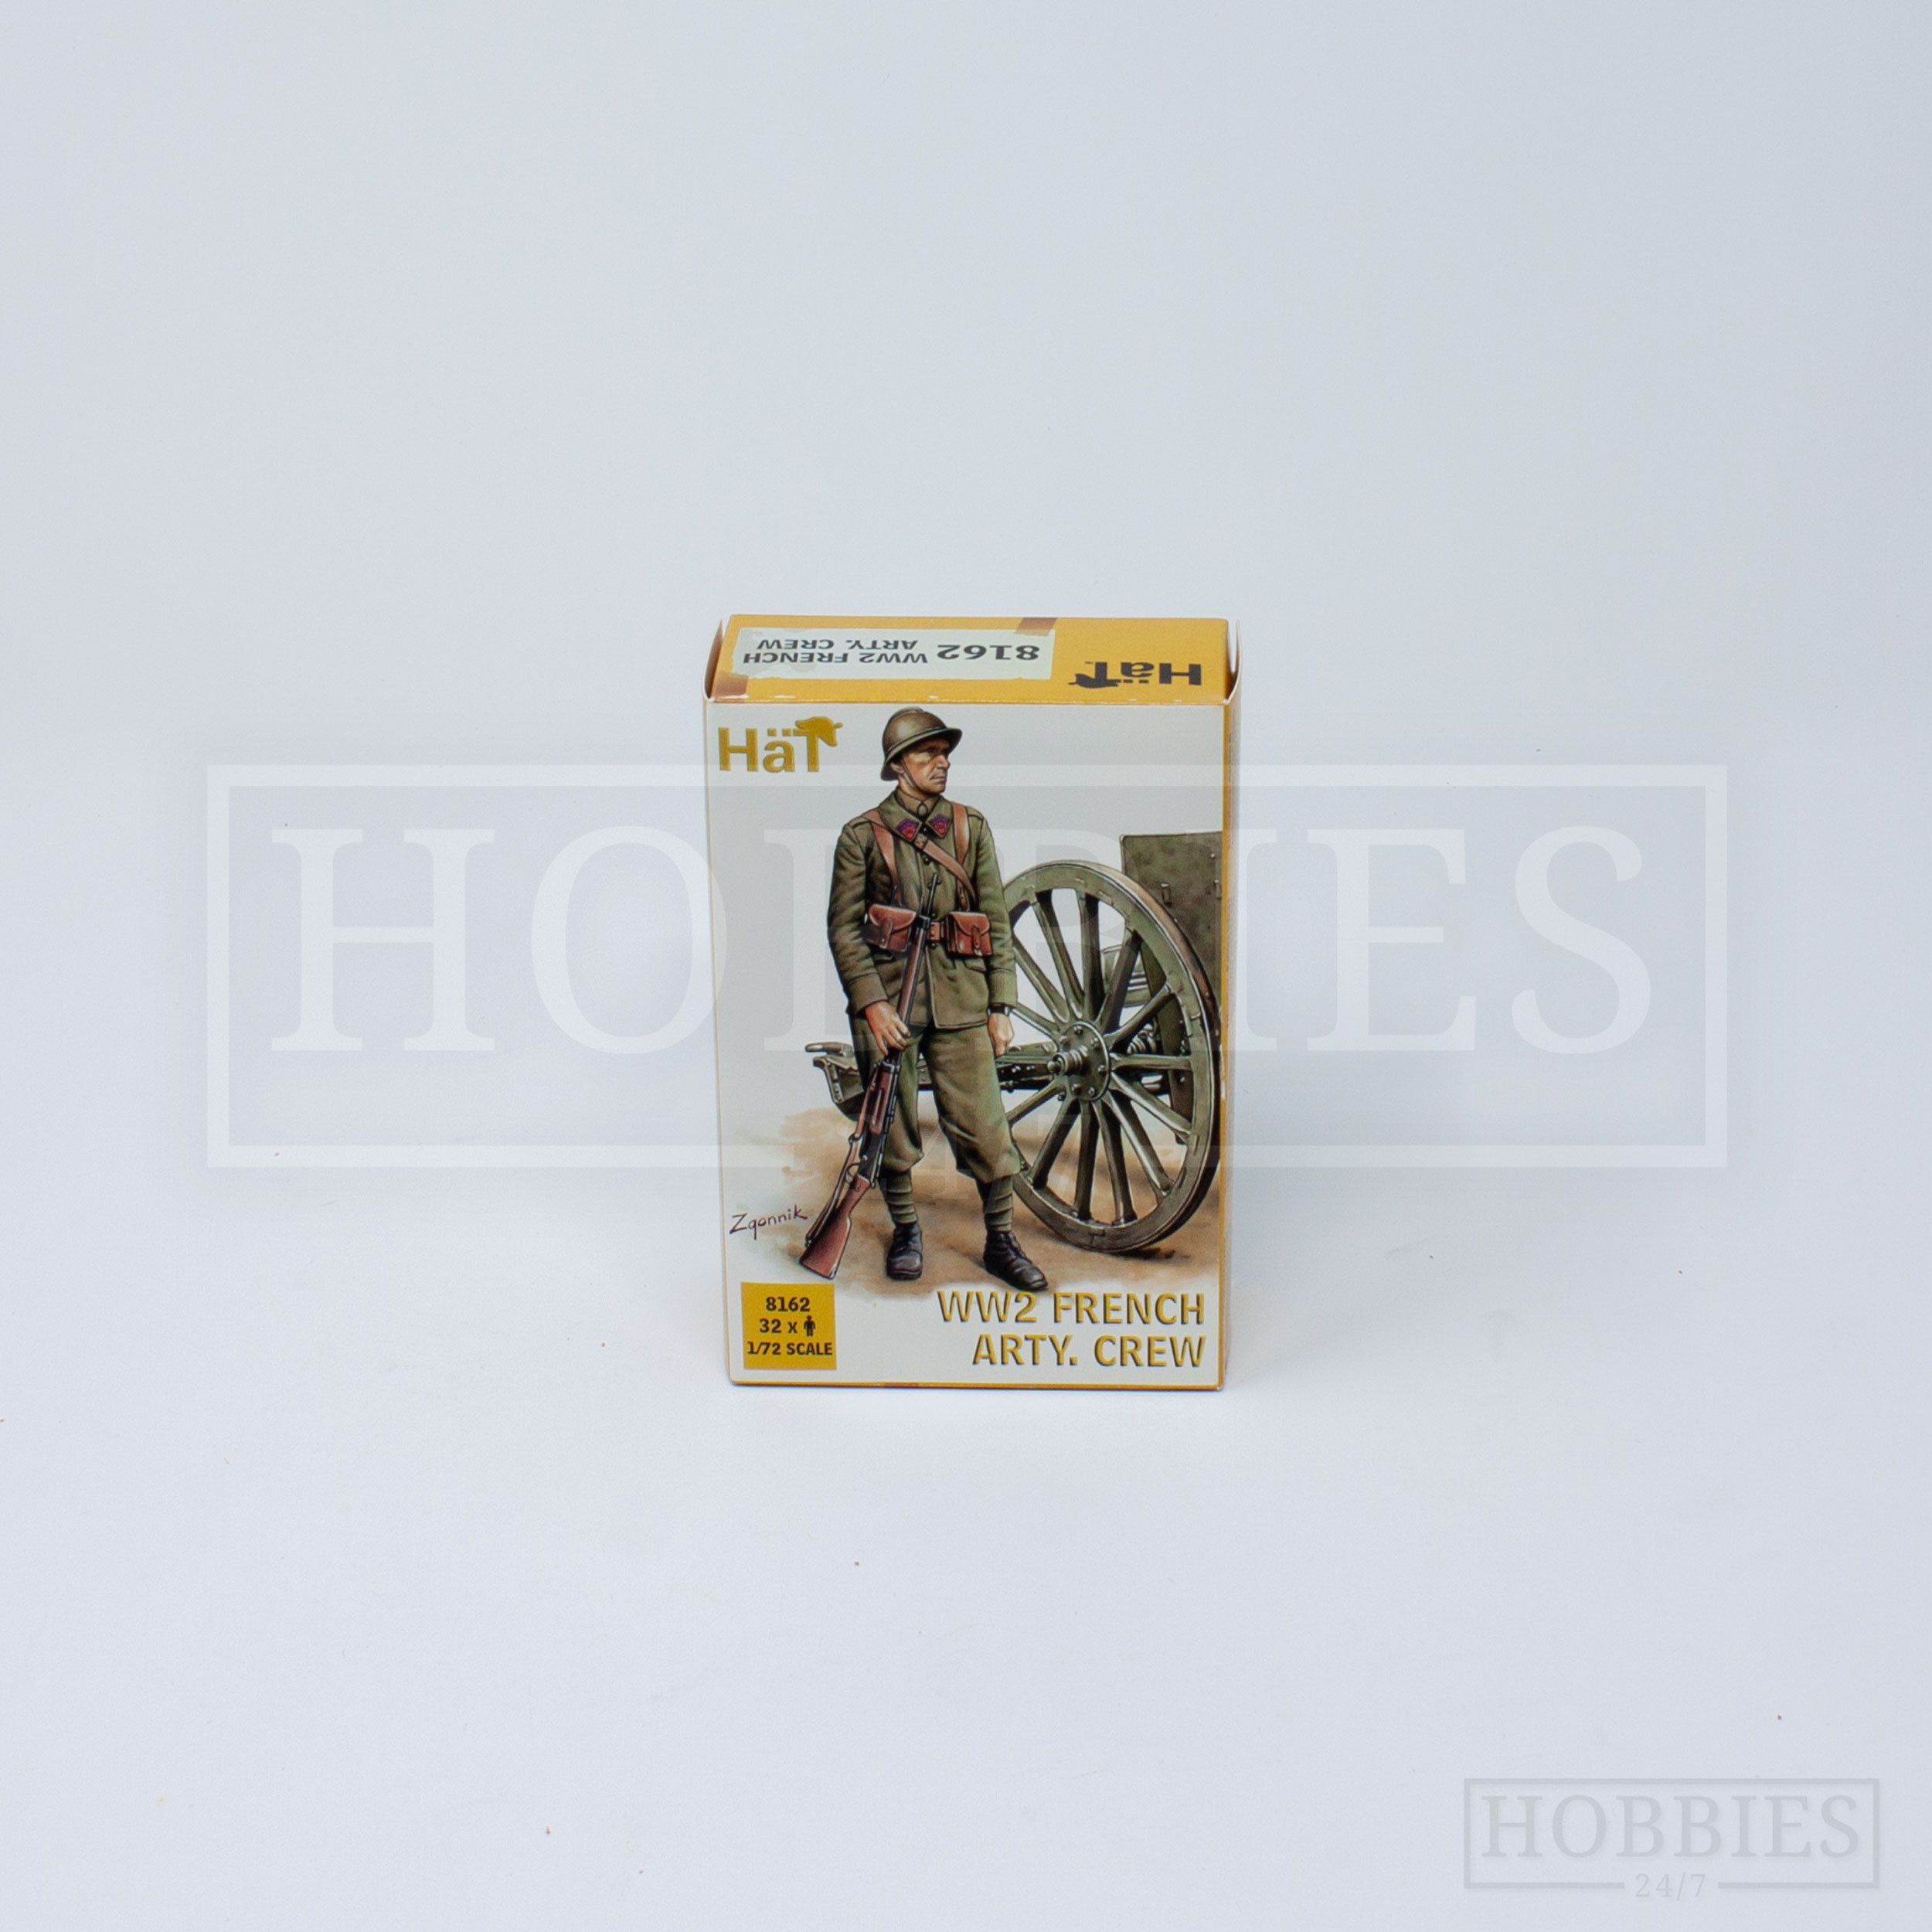 1/72 scale HaT 8162 WW2 French Artillery Crew 